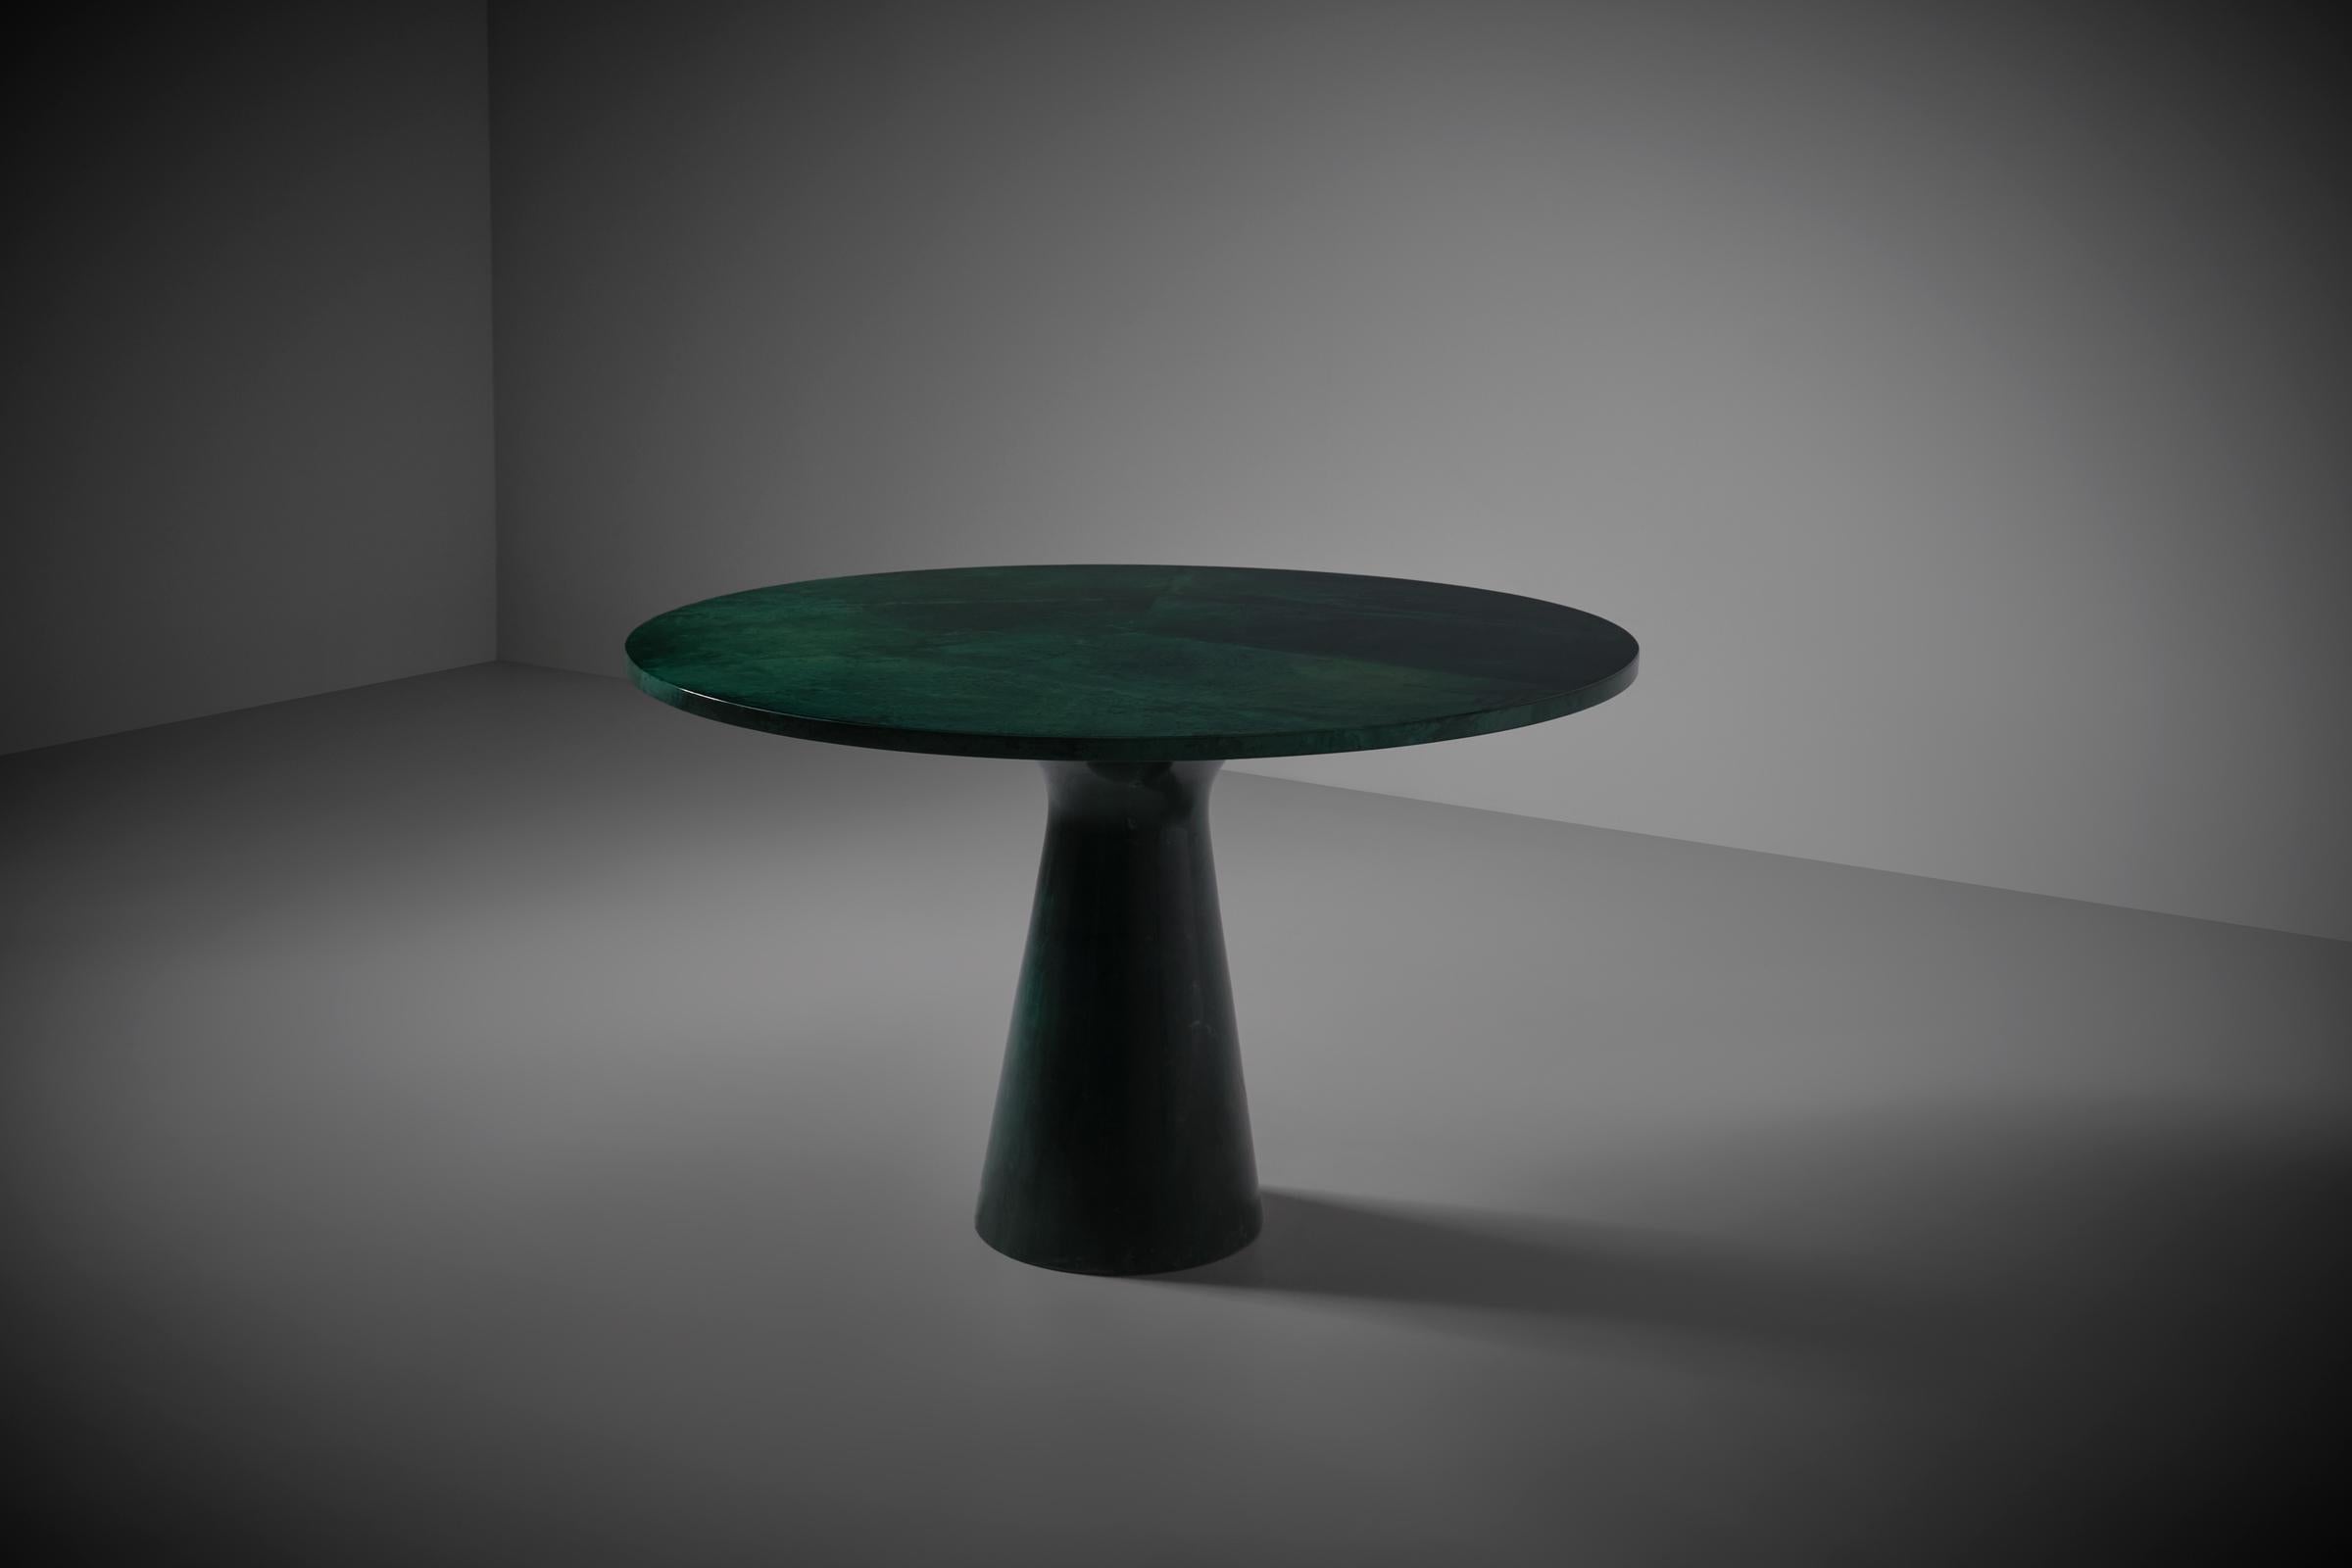 Round Green Pedestal dining table by Aldo Tura (1909-1963) and Giorgio Tura, Italy ca. 1965. Aldo Tura created outspoken designs inspired by Art Deco designs and was not afraid to use playful objects as inspiration. He mainly used colored parchment,